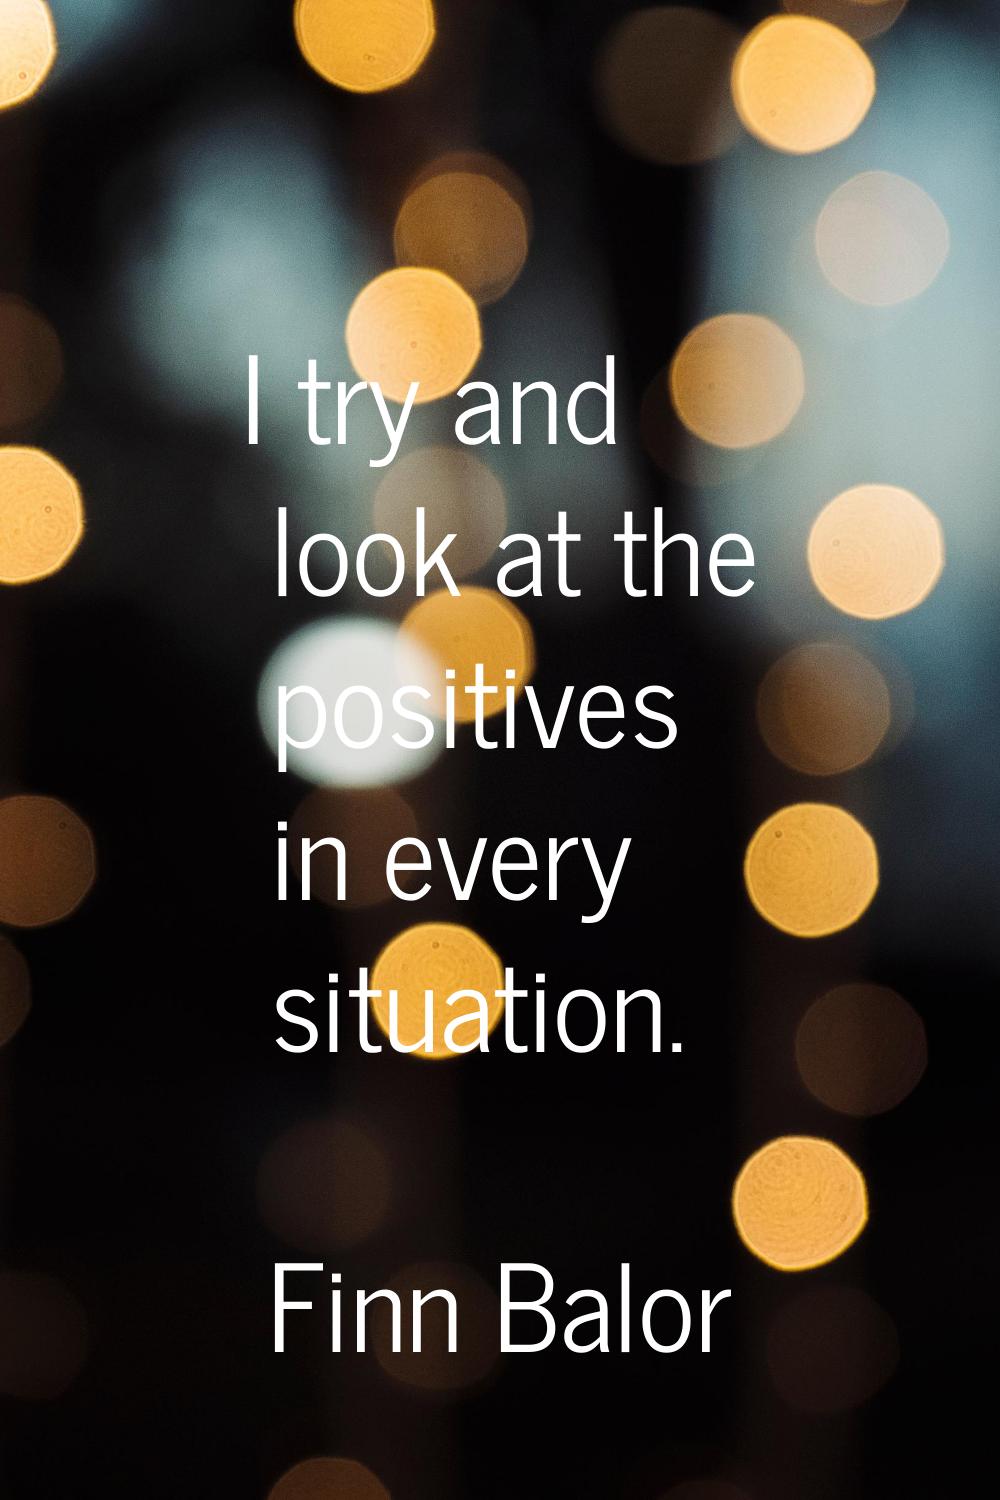 I try and look at the positives in every situation.